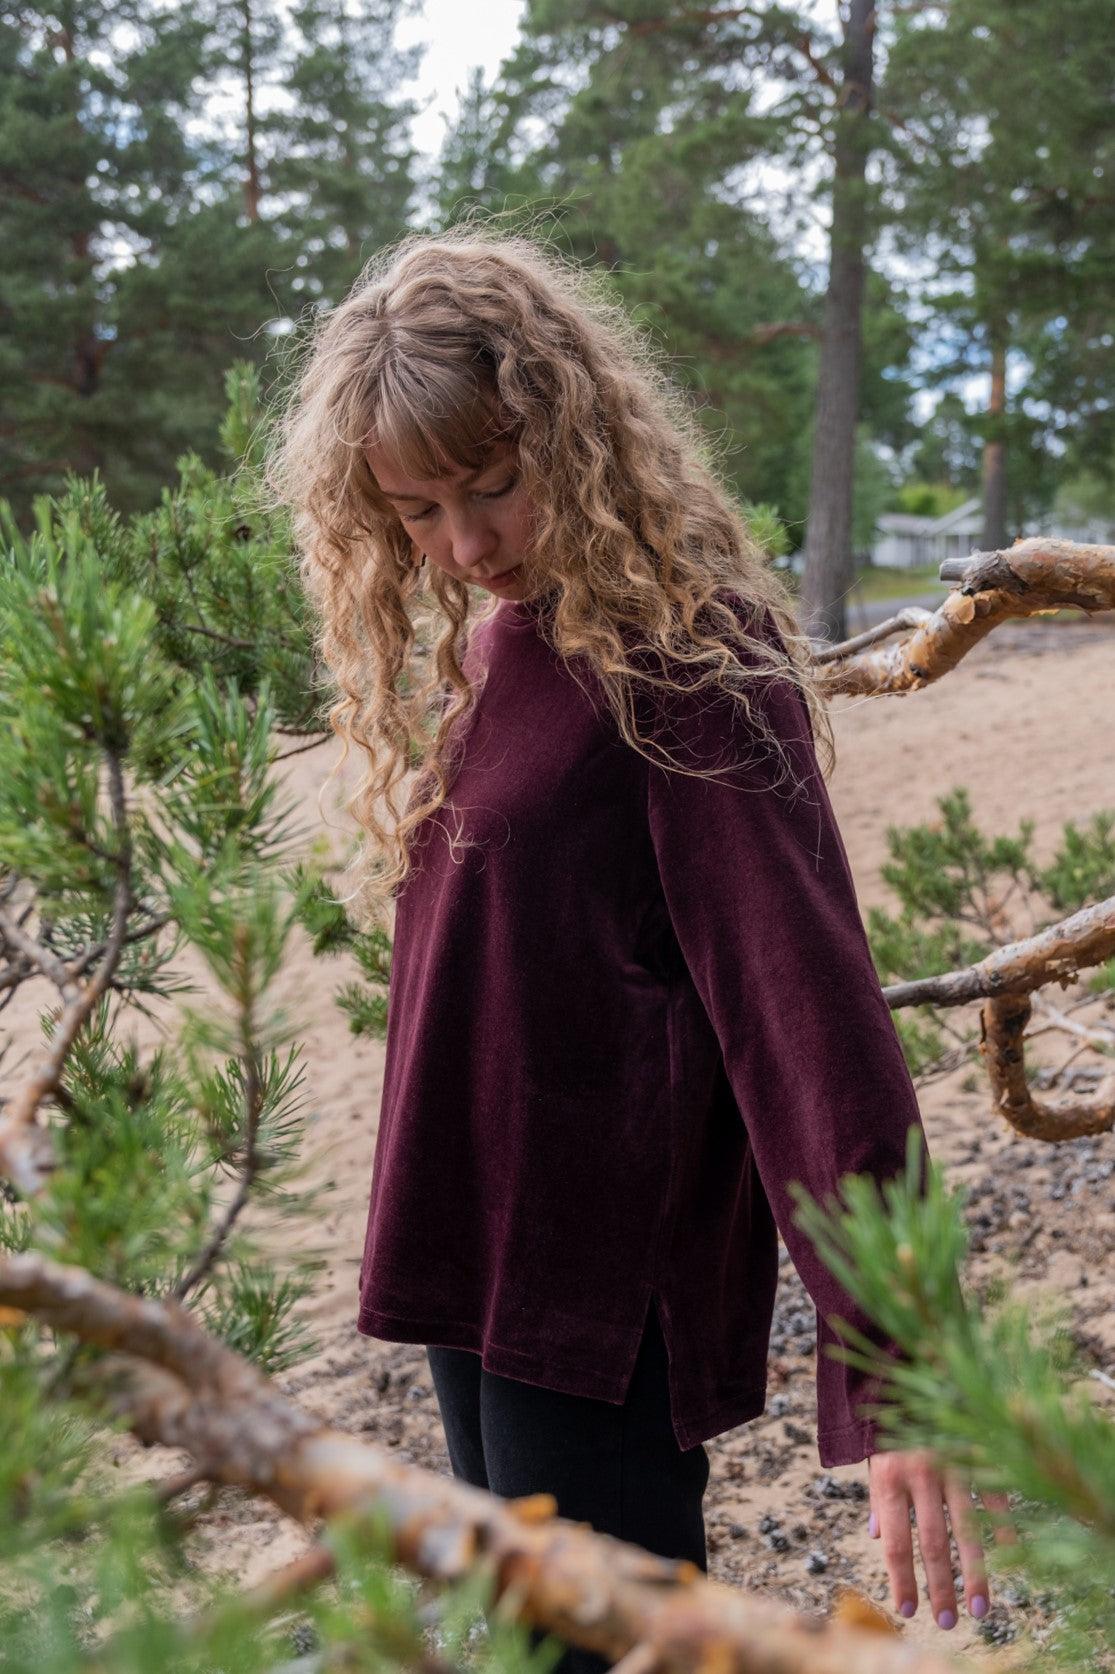 Buy online our sustainable clothing Sweater Wanderer Sweater - Kaarnikka - MORICO